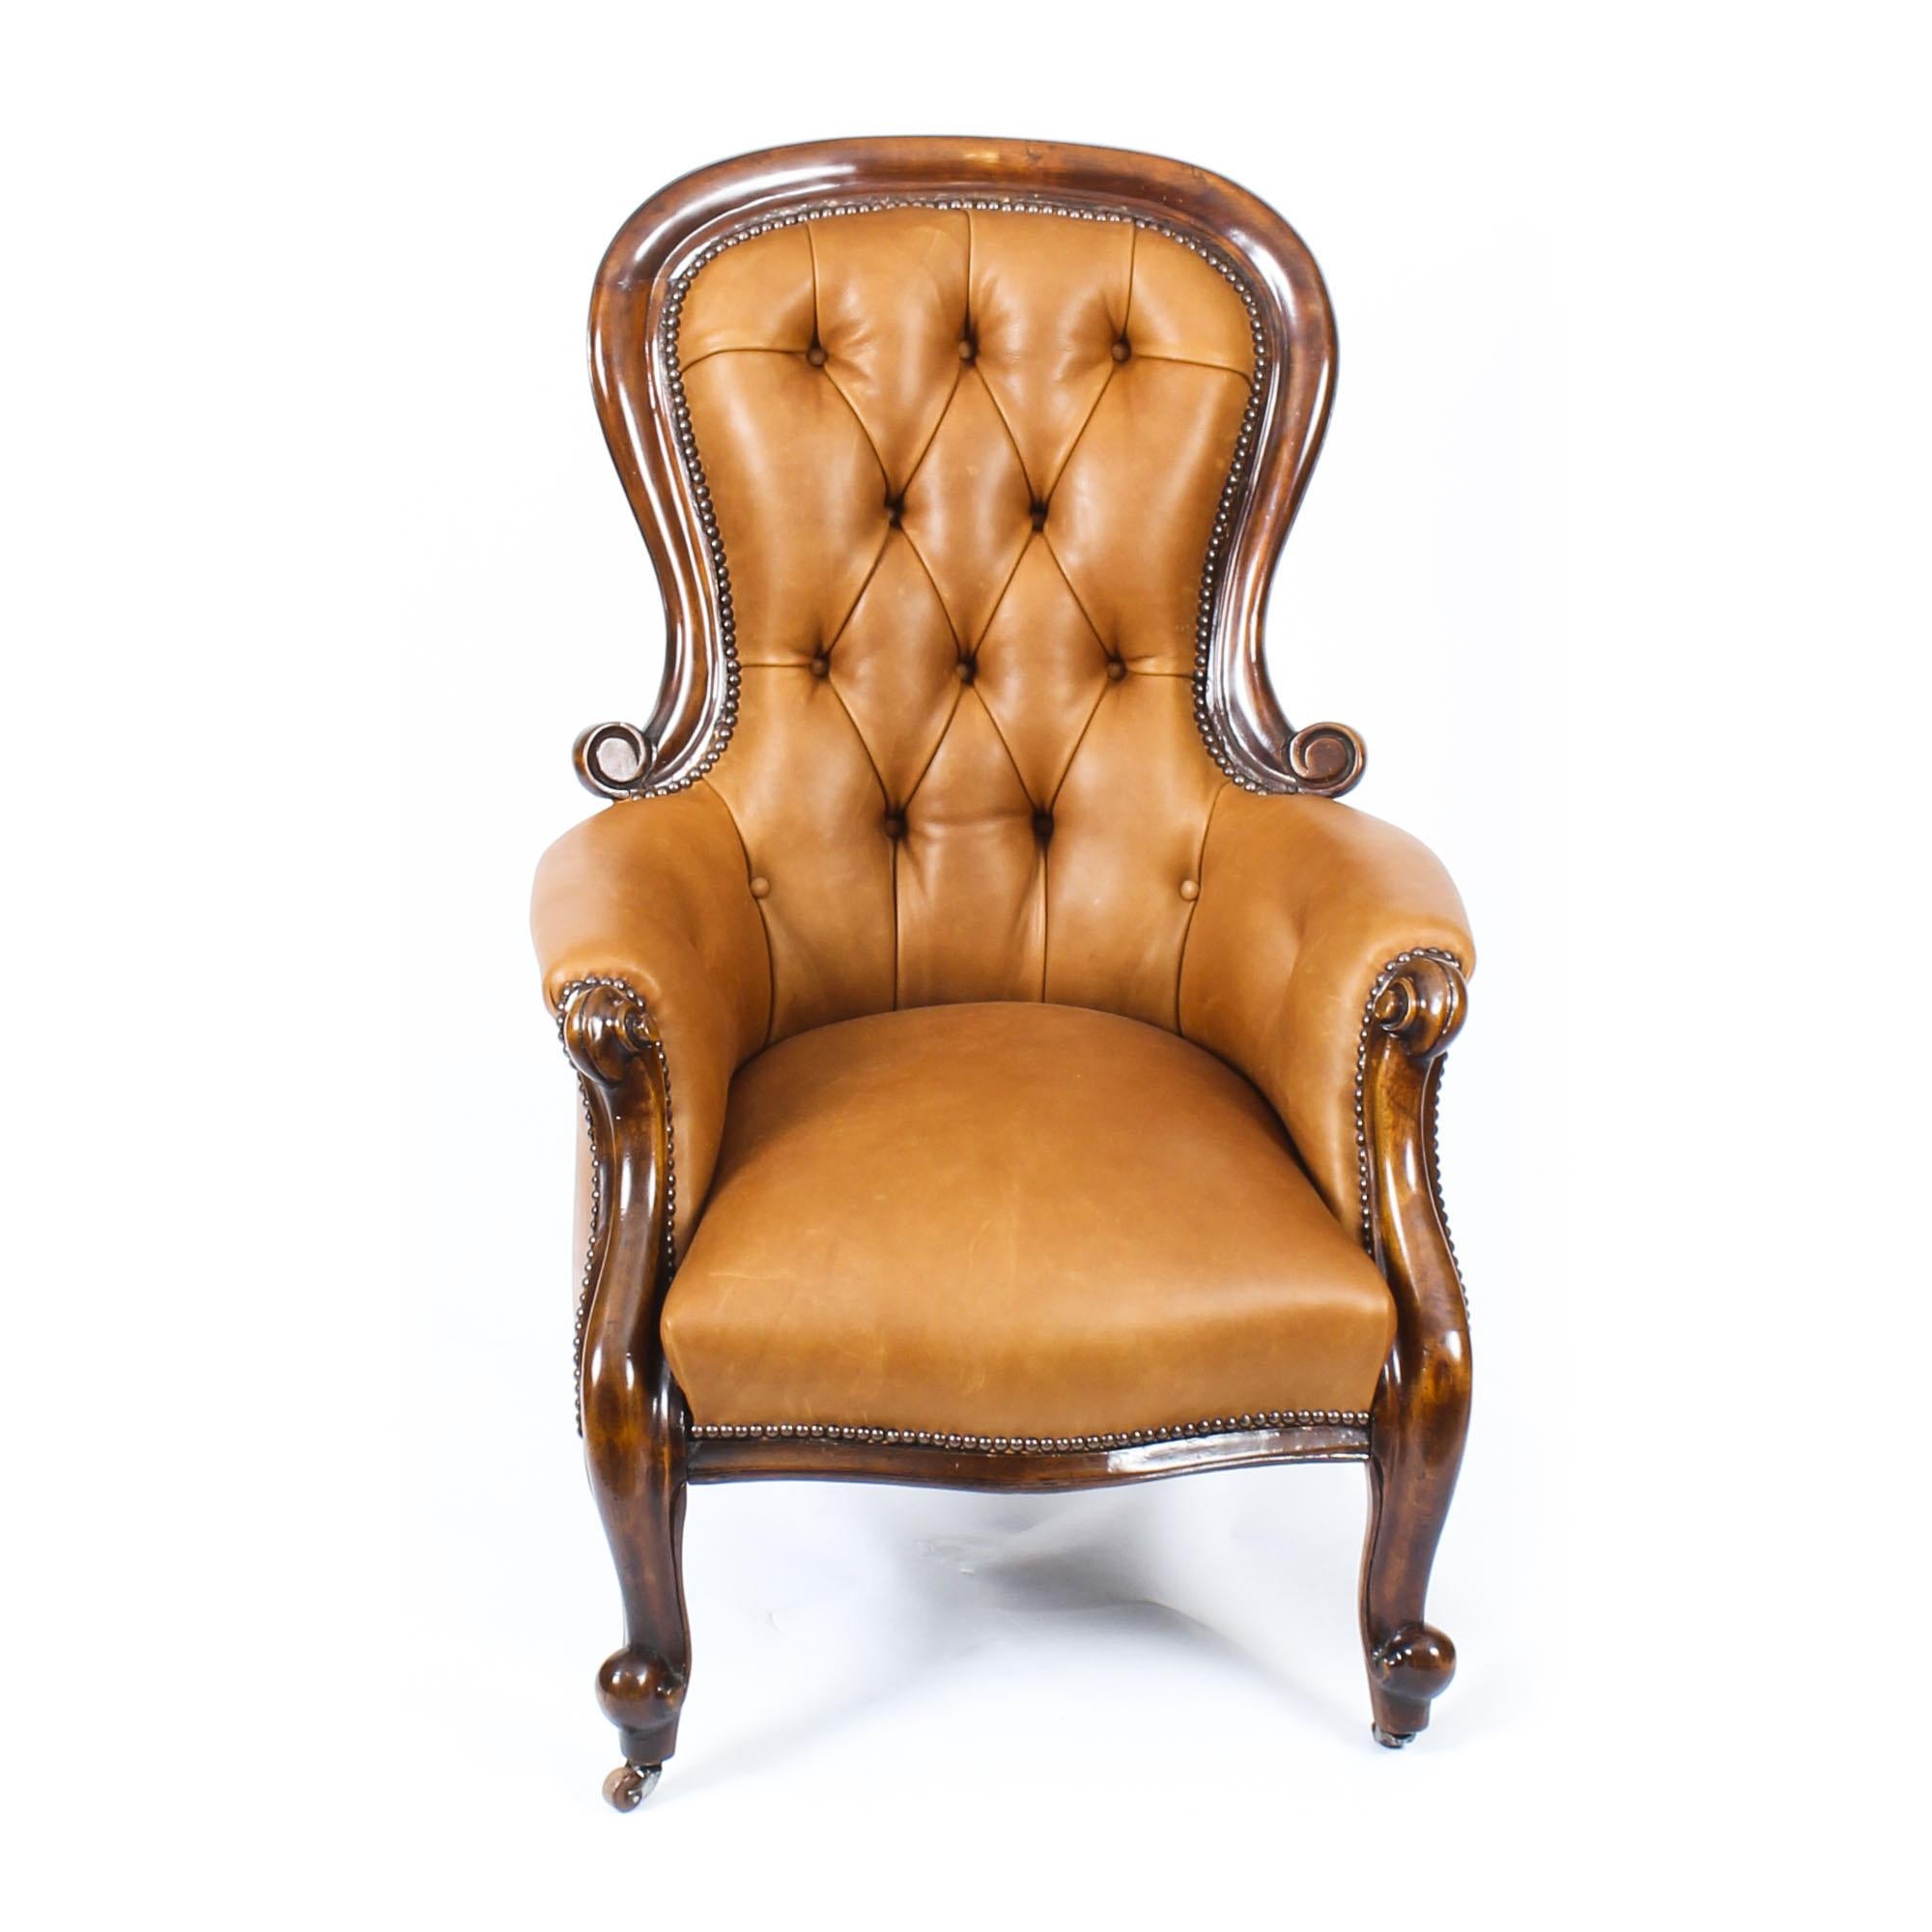 This is a handsome pair of antique Victorian mahogany and leather upholstered spoonback armchairs, circa 1870 in date.
 
This pair was made from hand carved solid mahogany, each with button backed leather upholstery in a beautiful tan colour. They